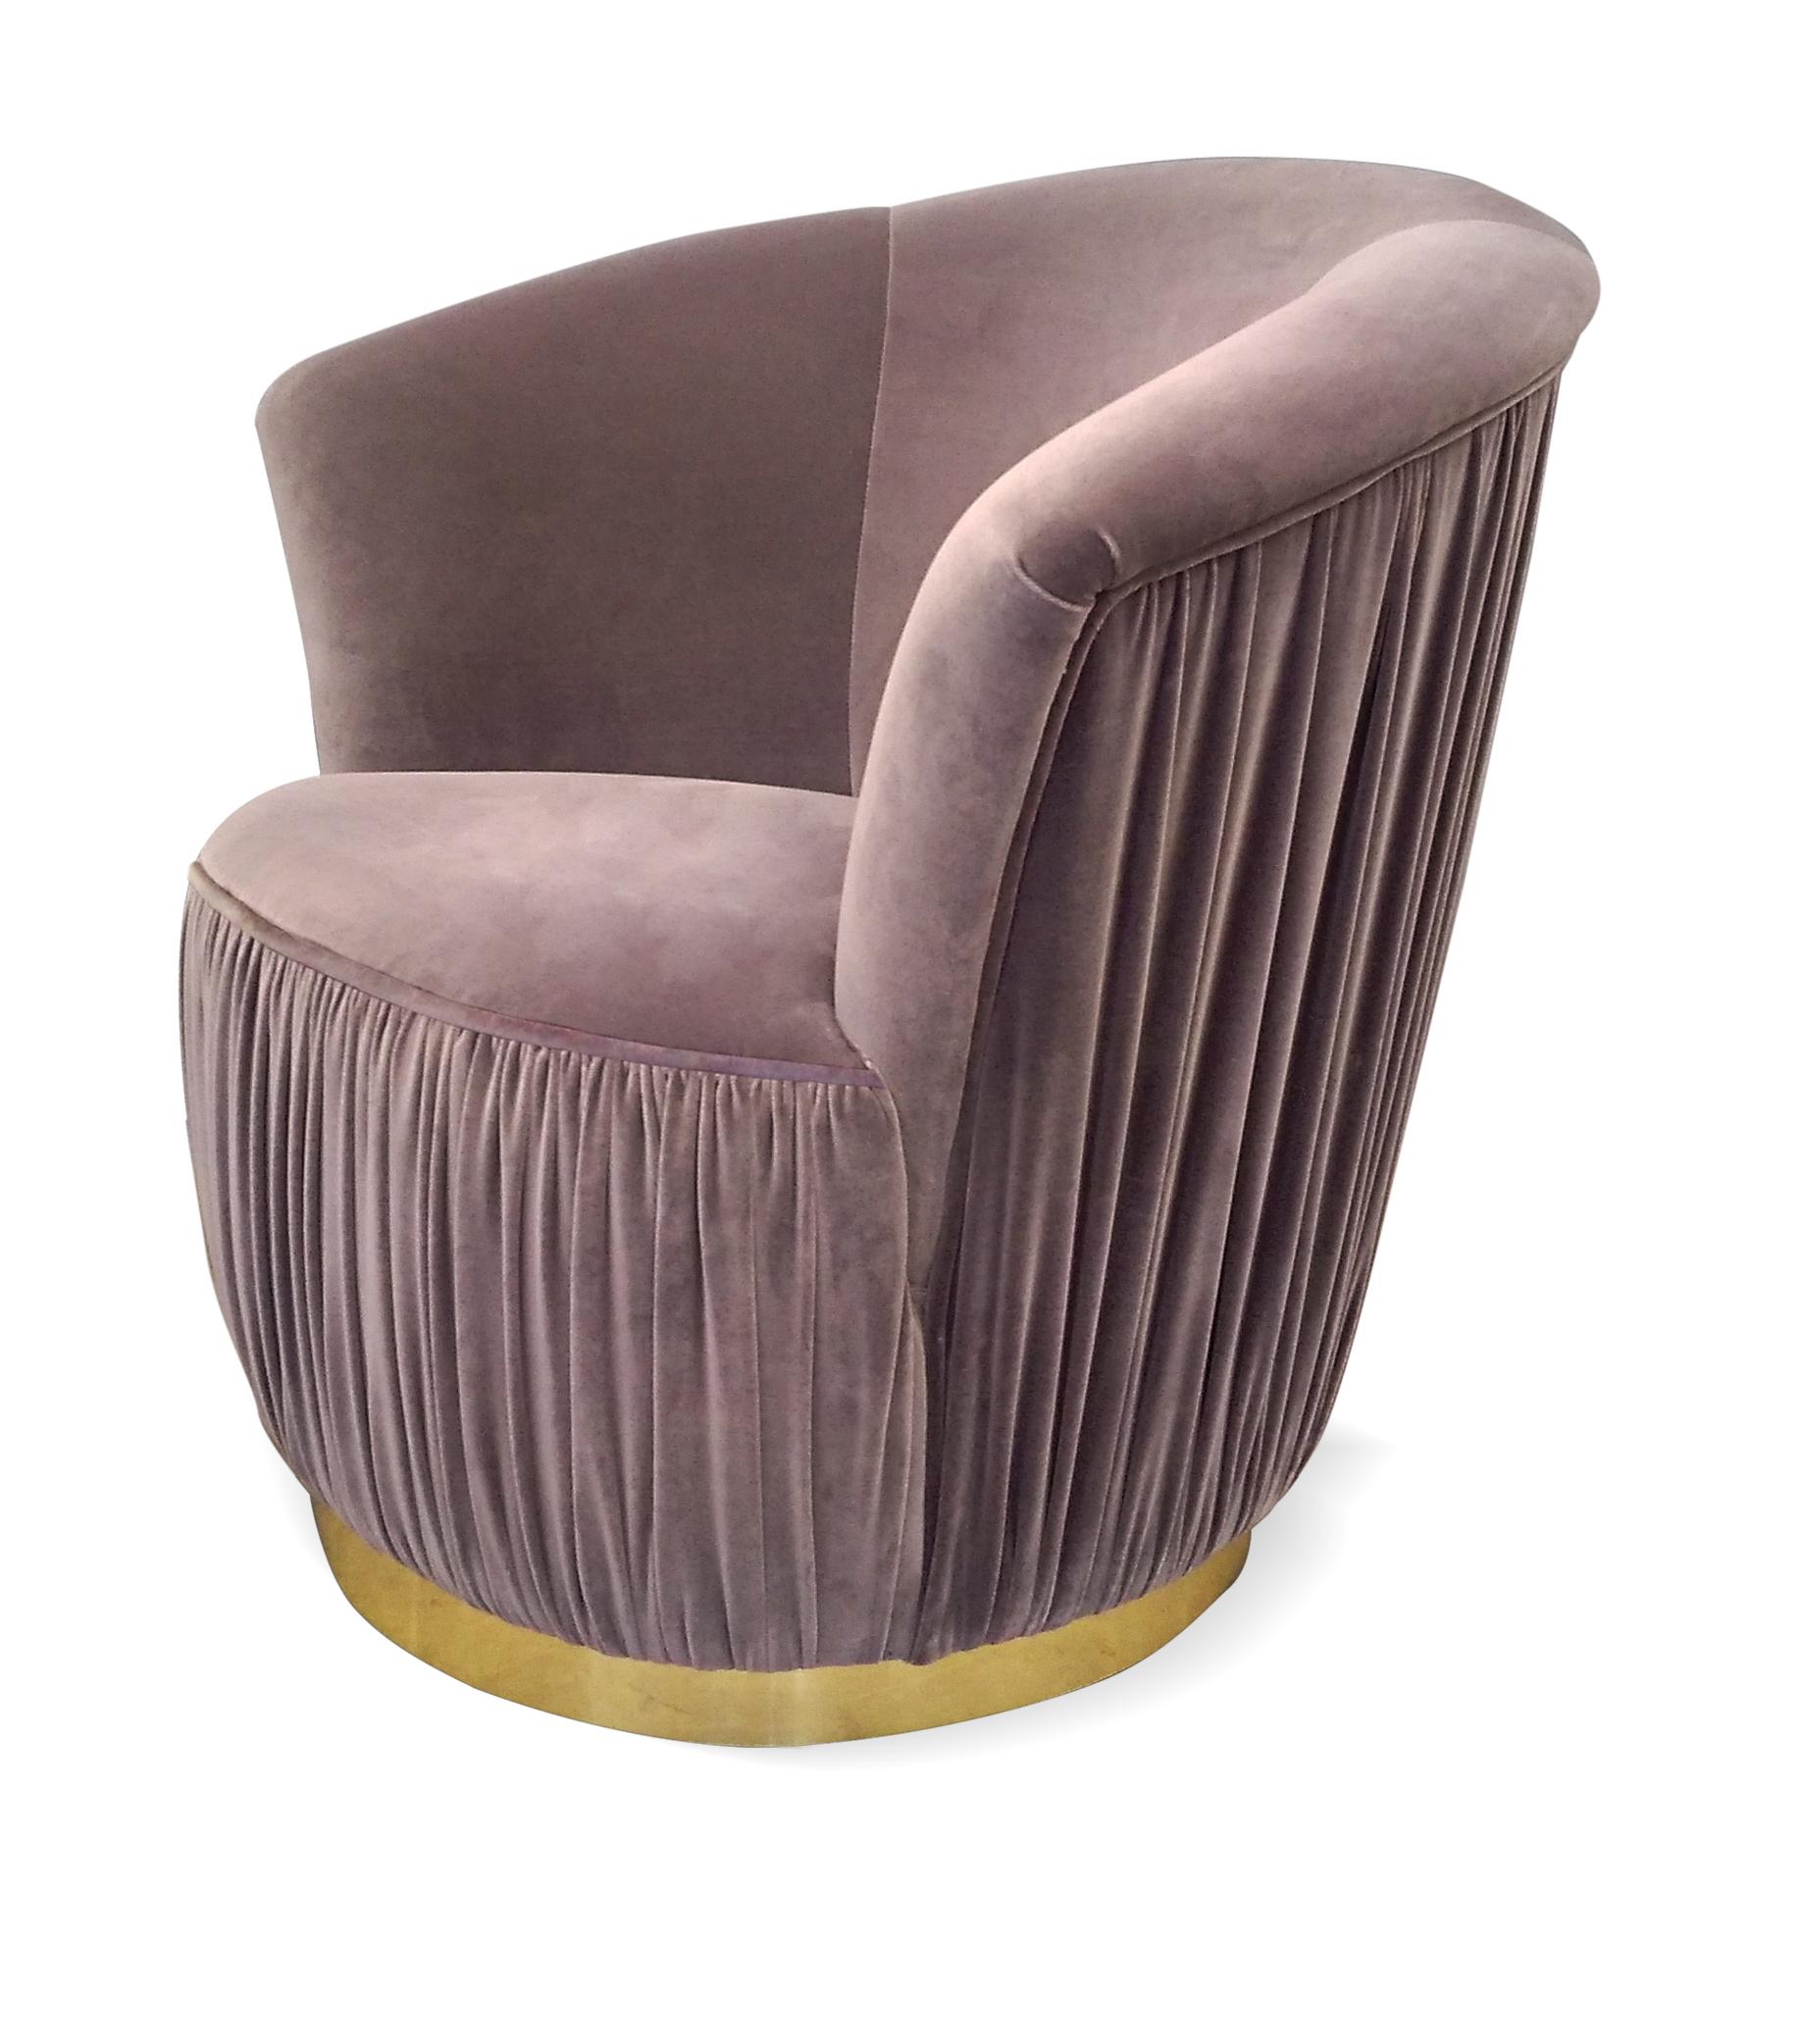 Poised and regal, the Countess reigns supreme even in the most luxurious designs. Her fanned back is reminiscent of the royal collars adorned by highnesses of days past. Her lady like figure is covered in plush upholstery fabric, sitting perched